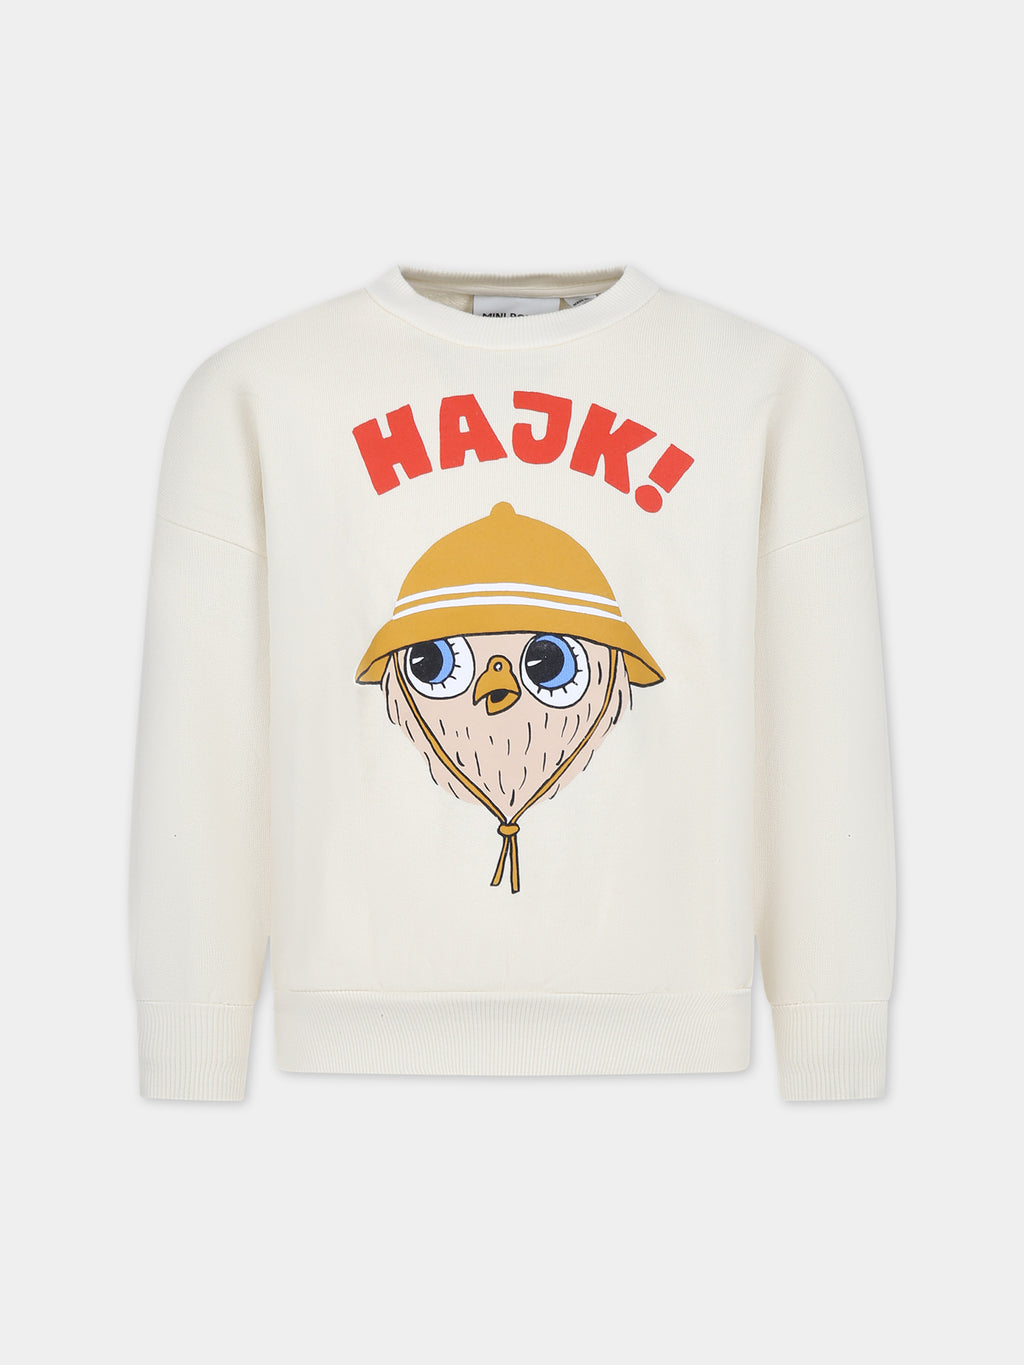 Ivory sweatshirt for kids with owl